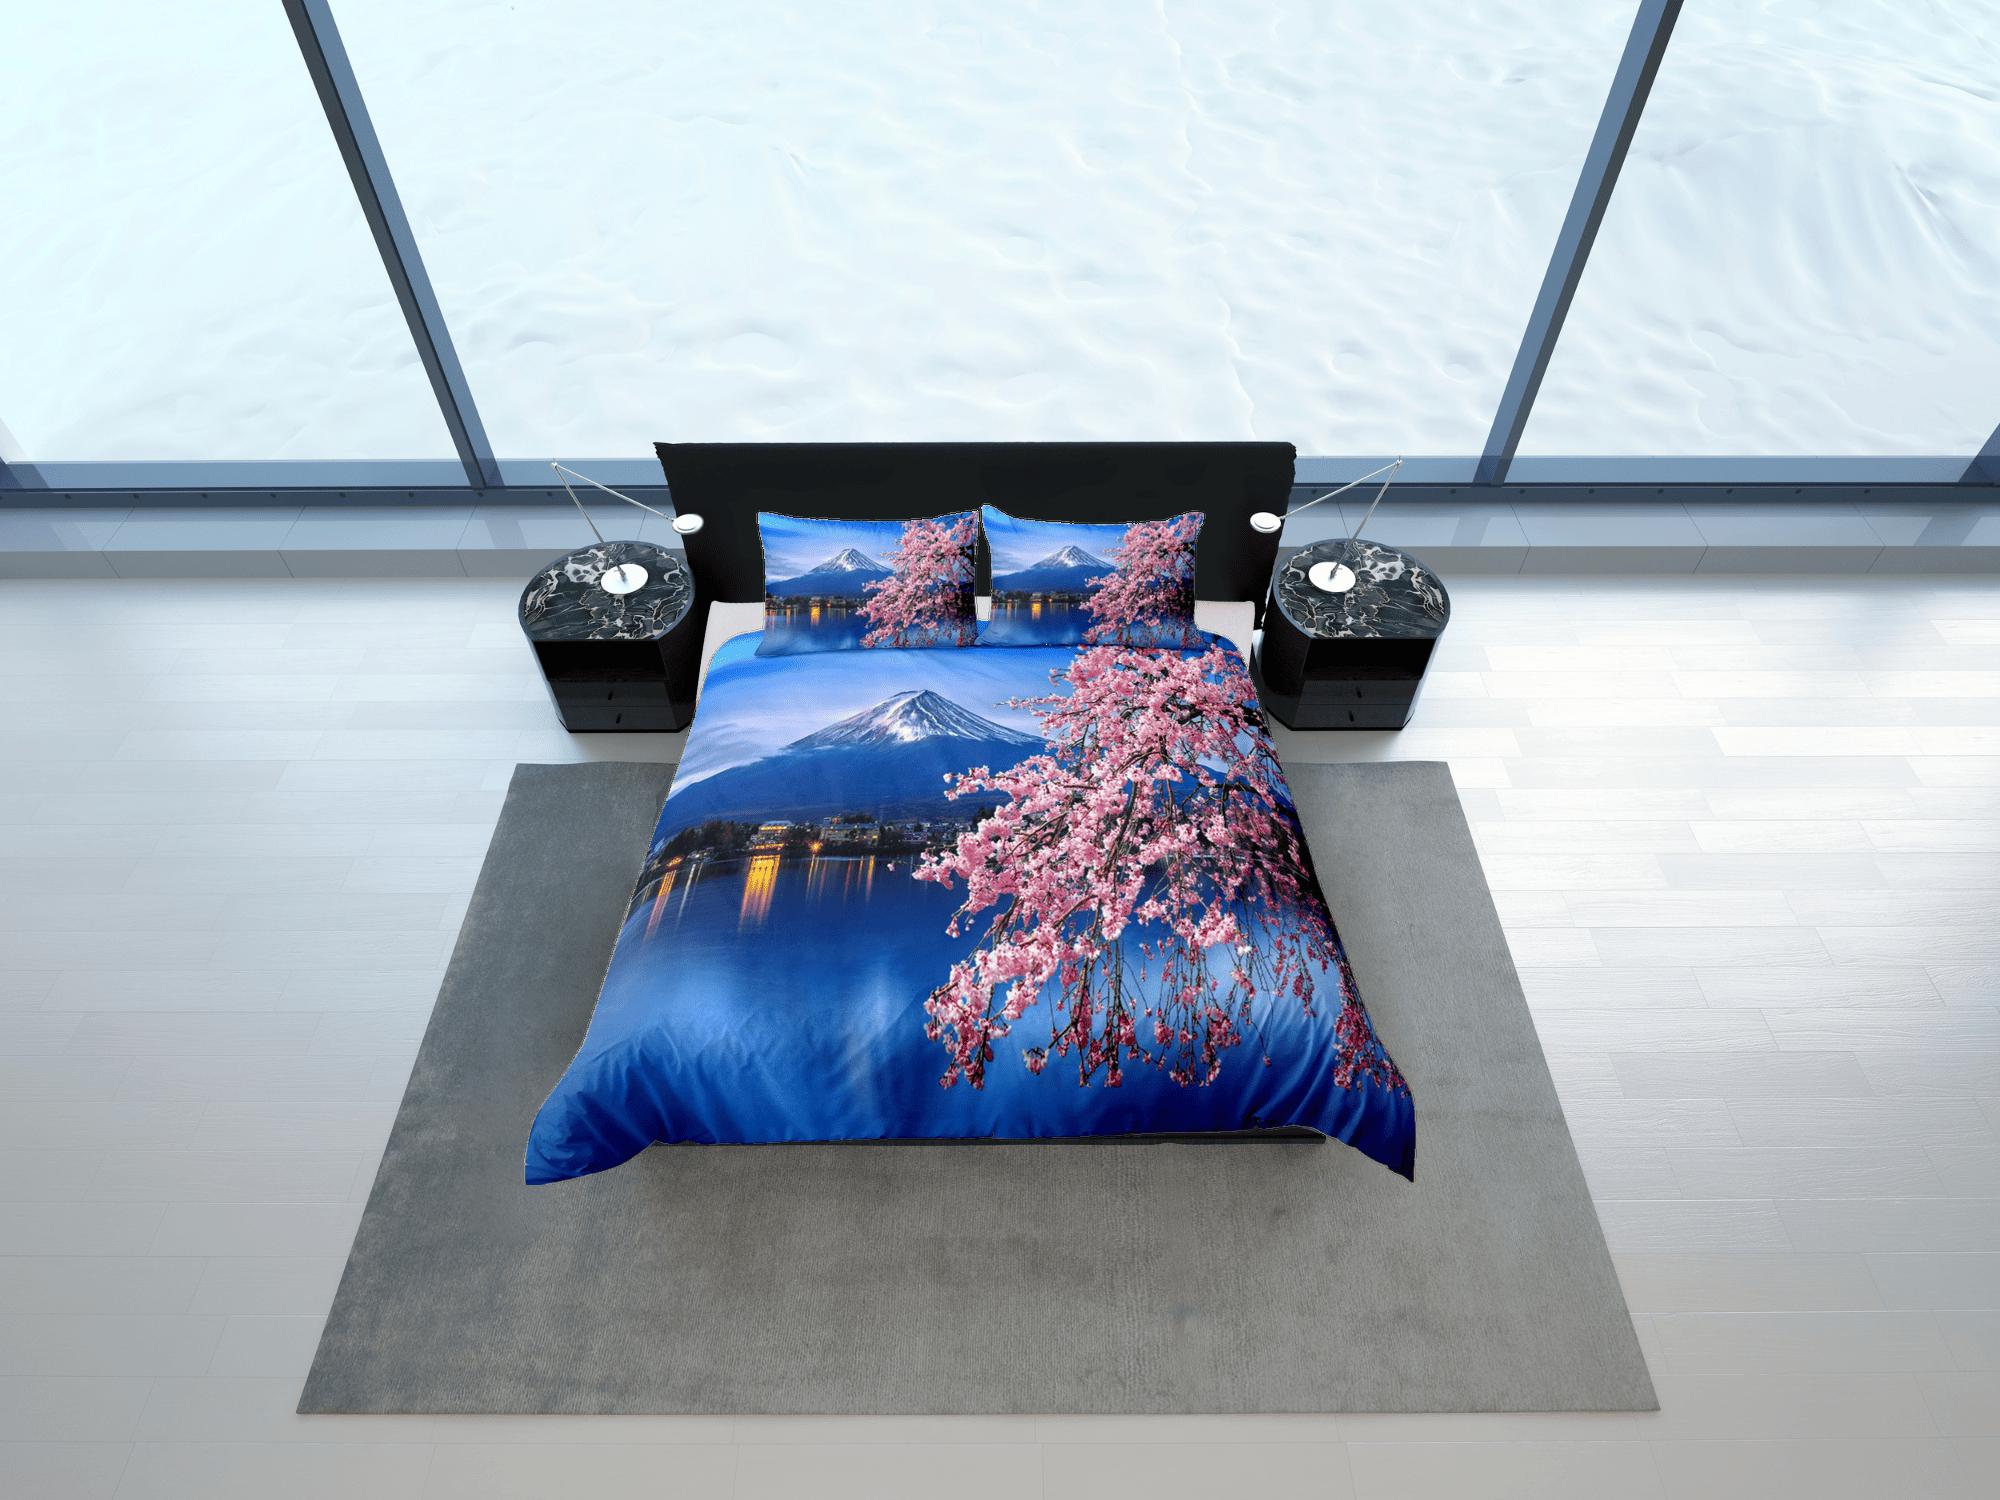 daintyduvet Cherry blossoms and mt. fuji printed bedding, japanese duvet cover set for king, queen, full, twin, single, toddler, zipper bedding